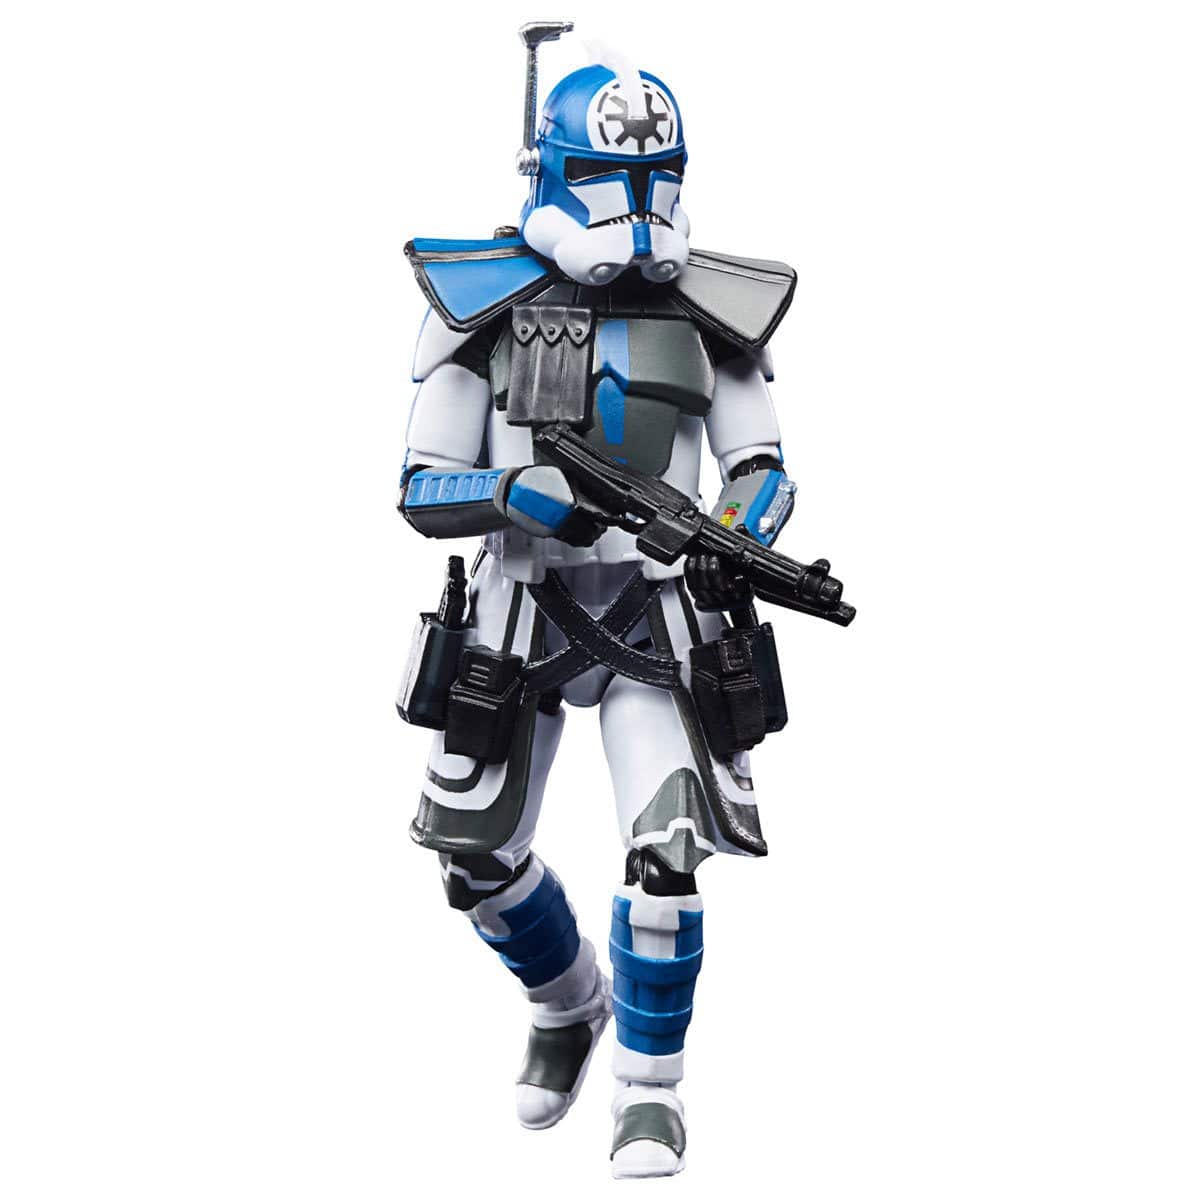 Star Wars The Vintage Collection ARC Trooper Jesse 3 3/4-Inch Action Figure Pop-O-Loco